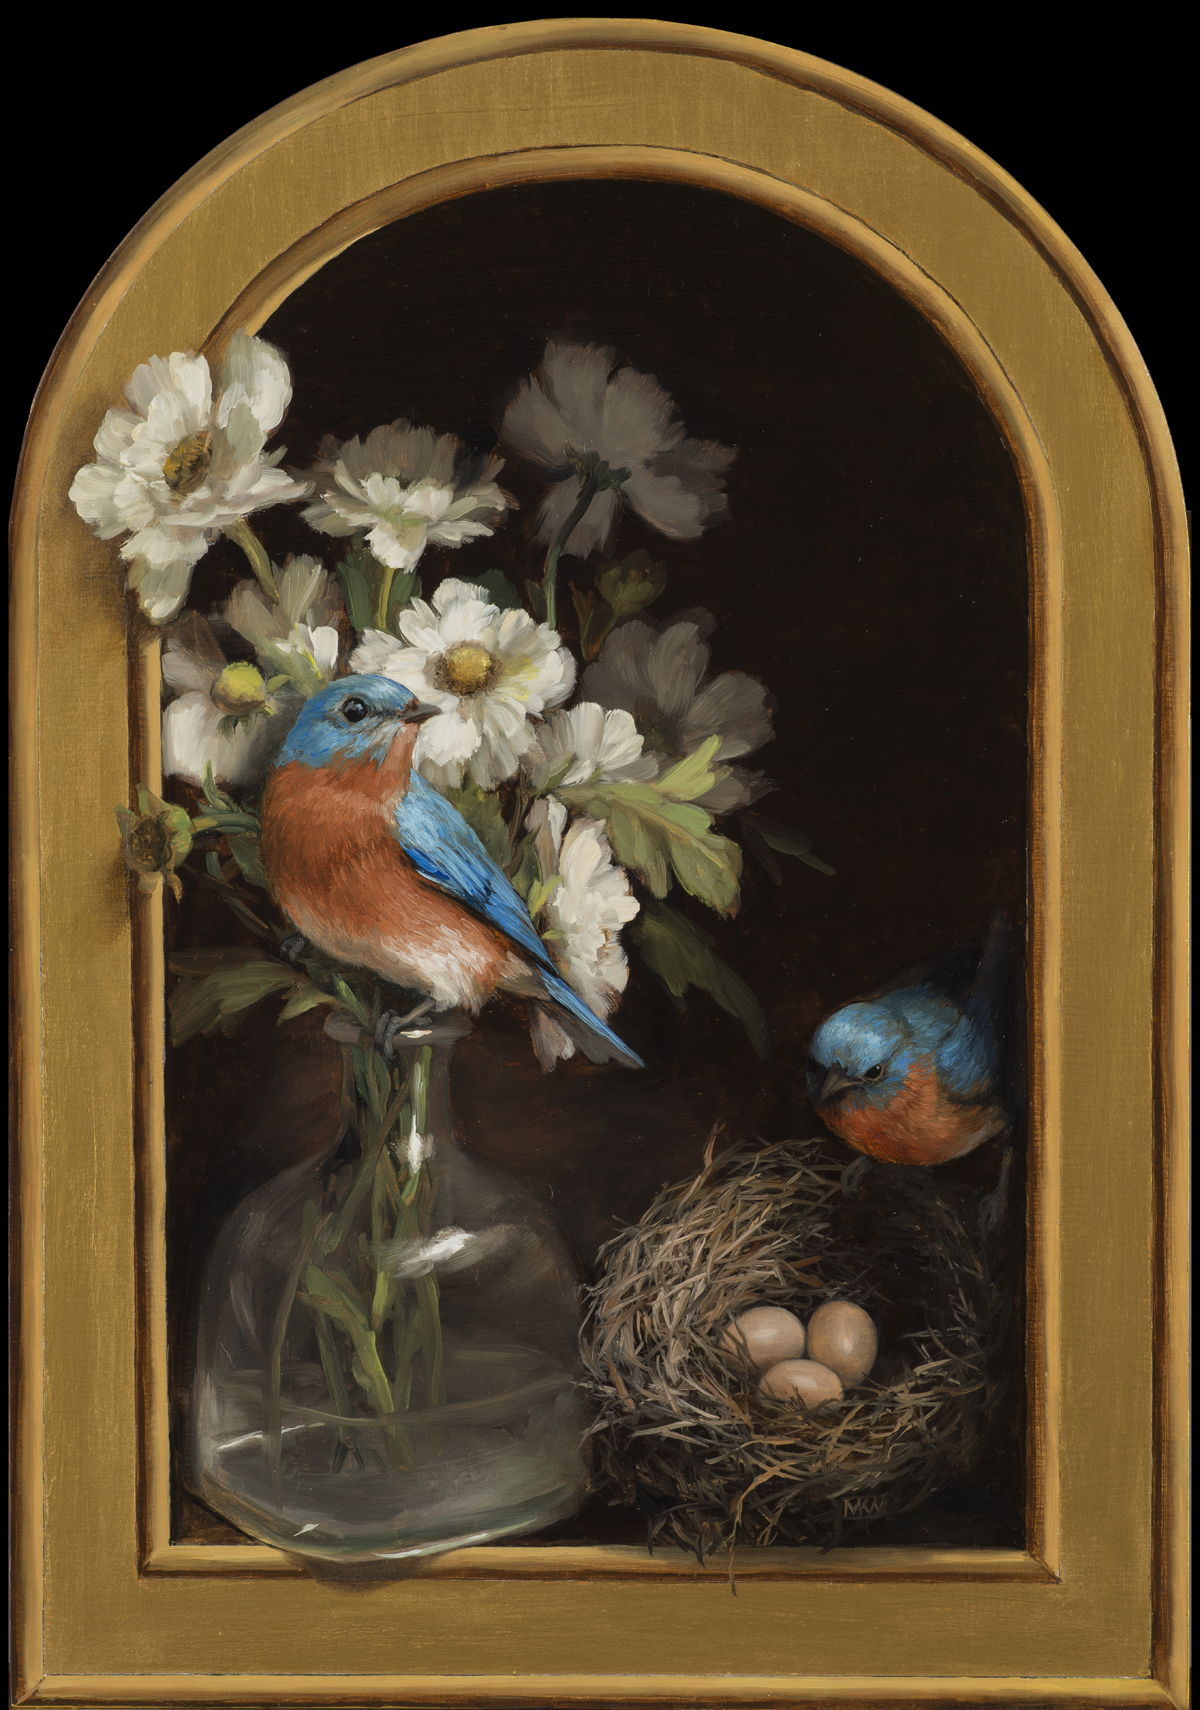 American Legacy Fine Arts presents "Bluebirds with Nest" a Painting by Mary Kay West.